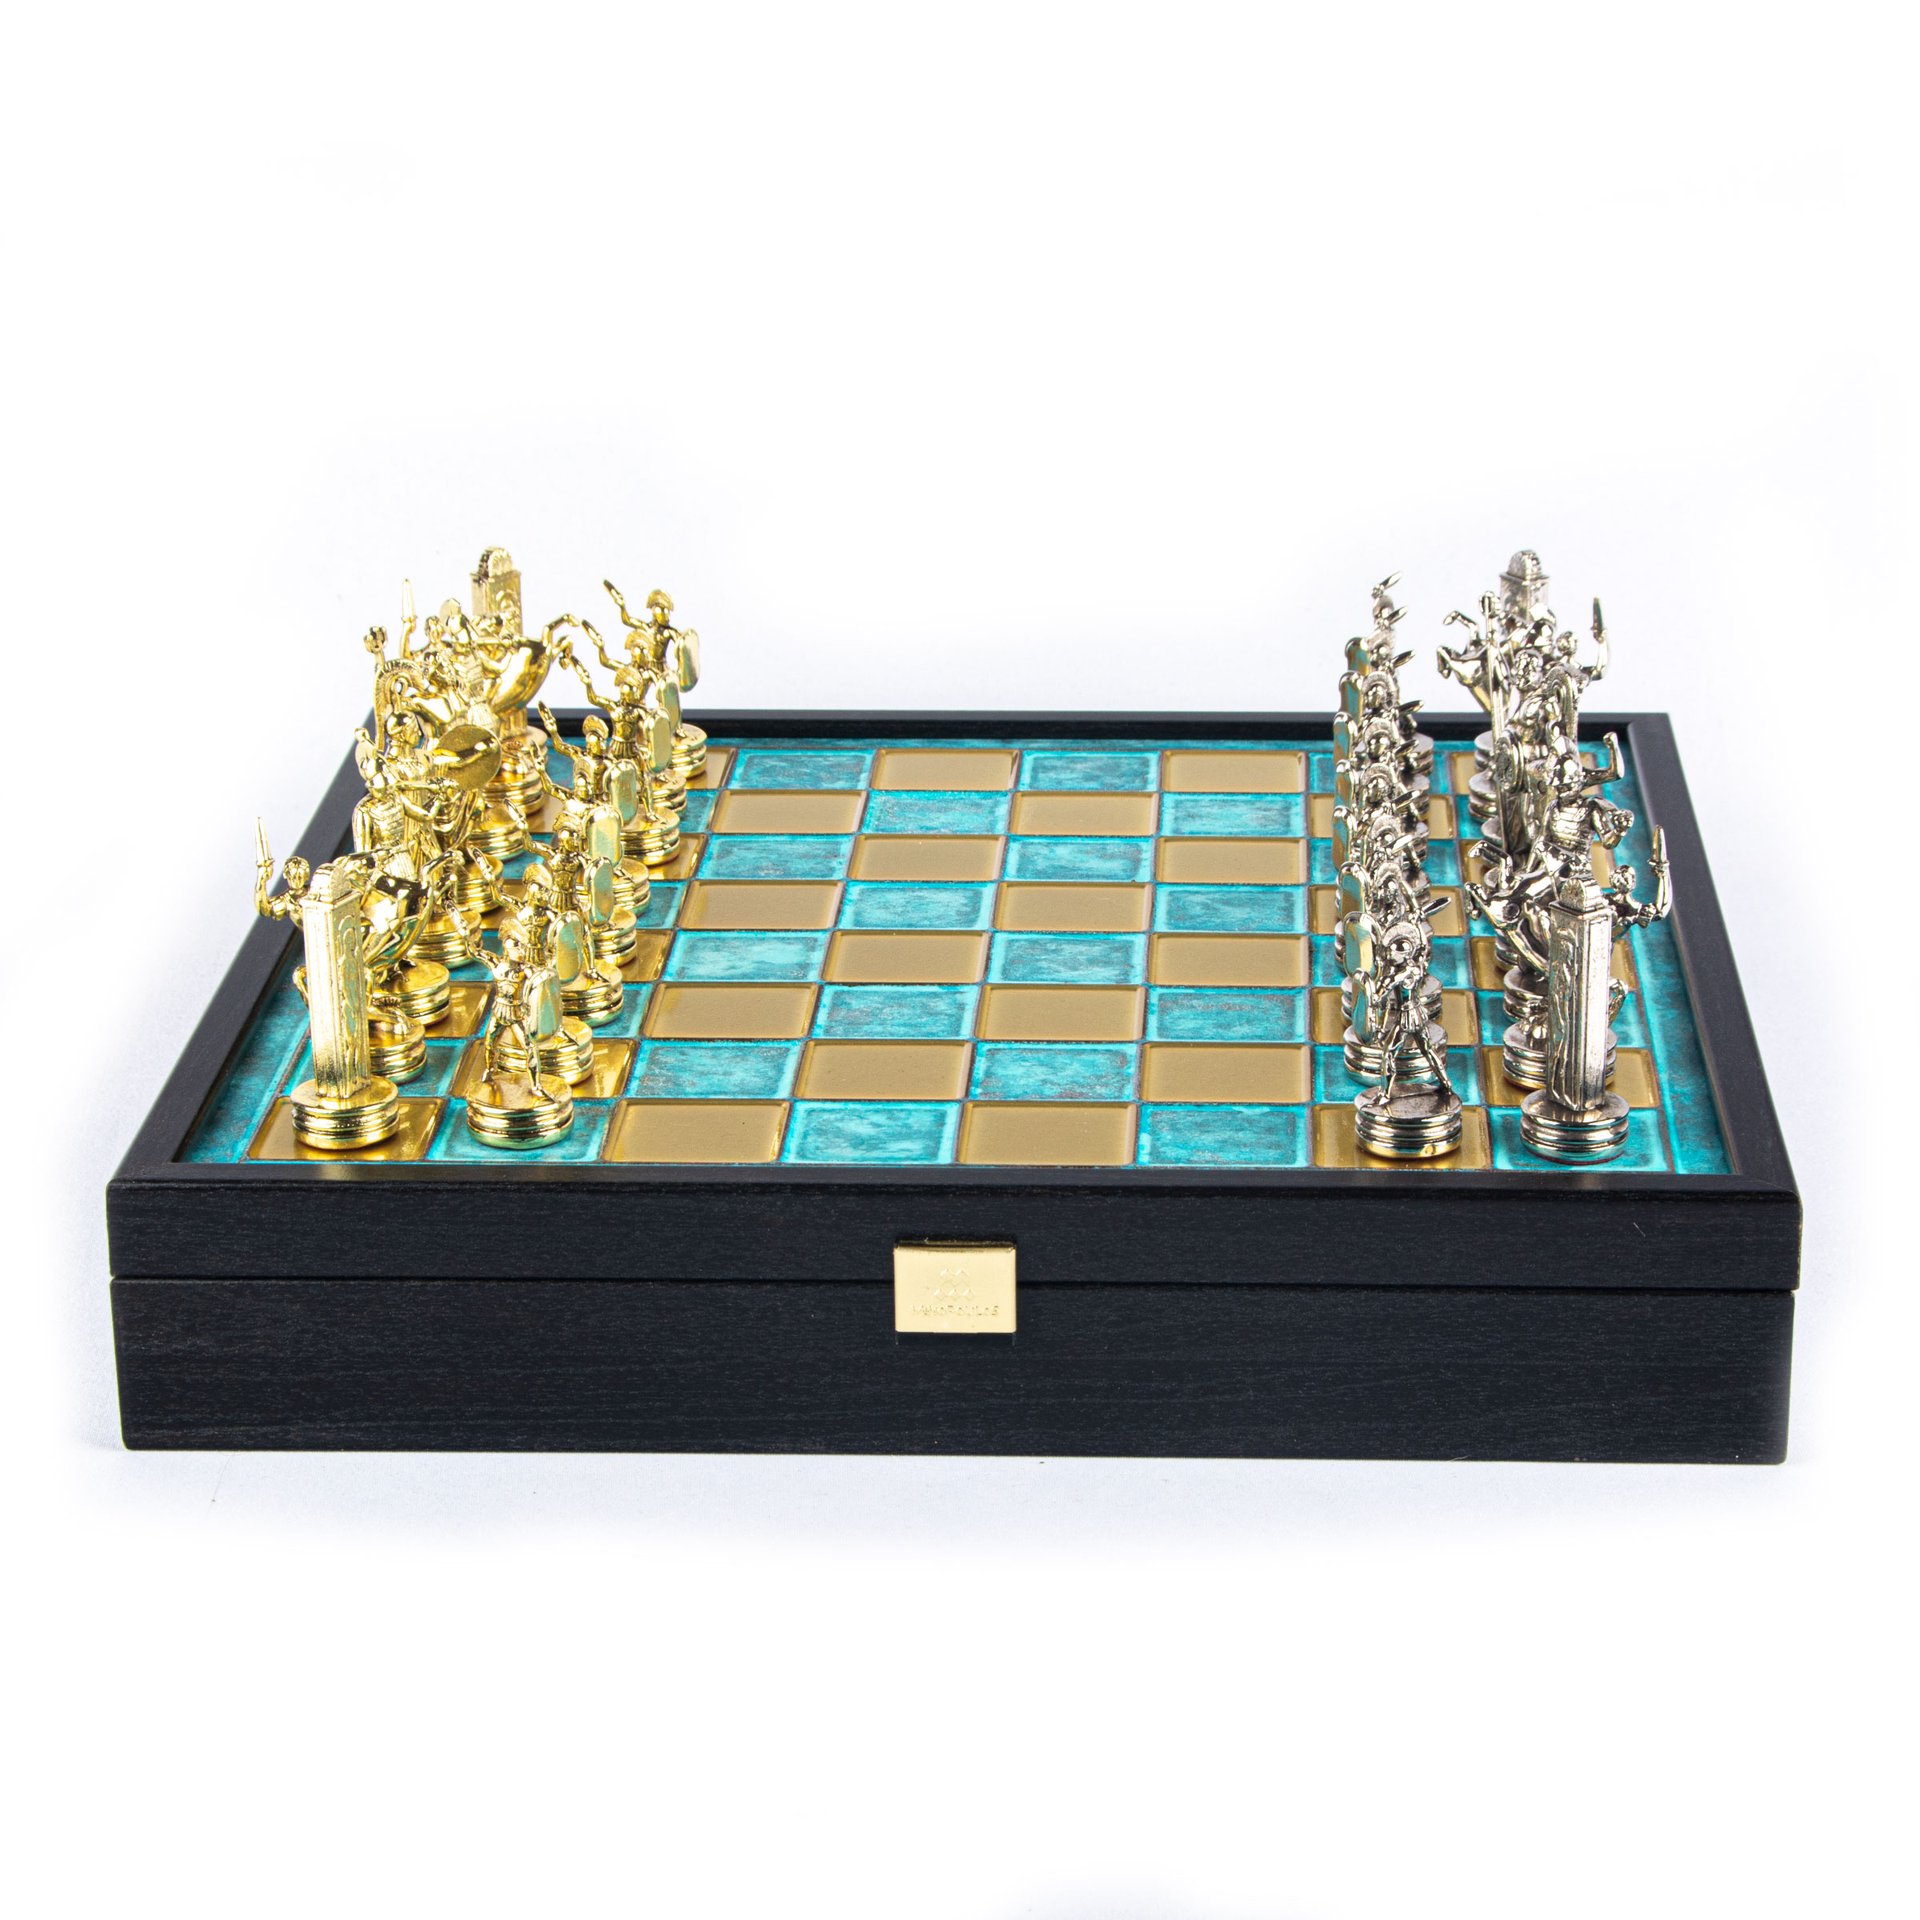 Cycladic Art Large Chess Set Bronze Material Blue Chess Board